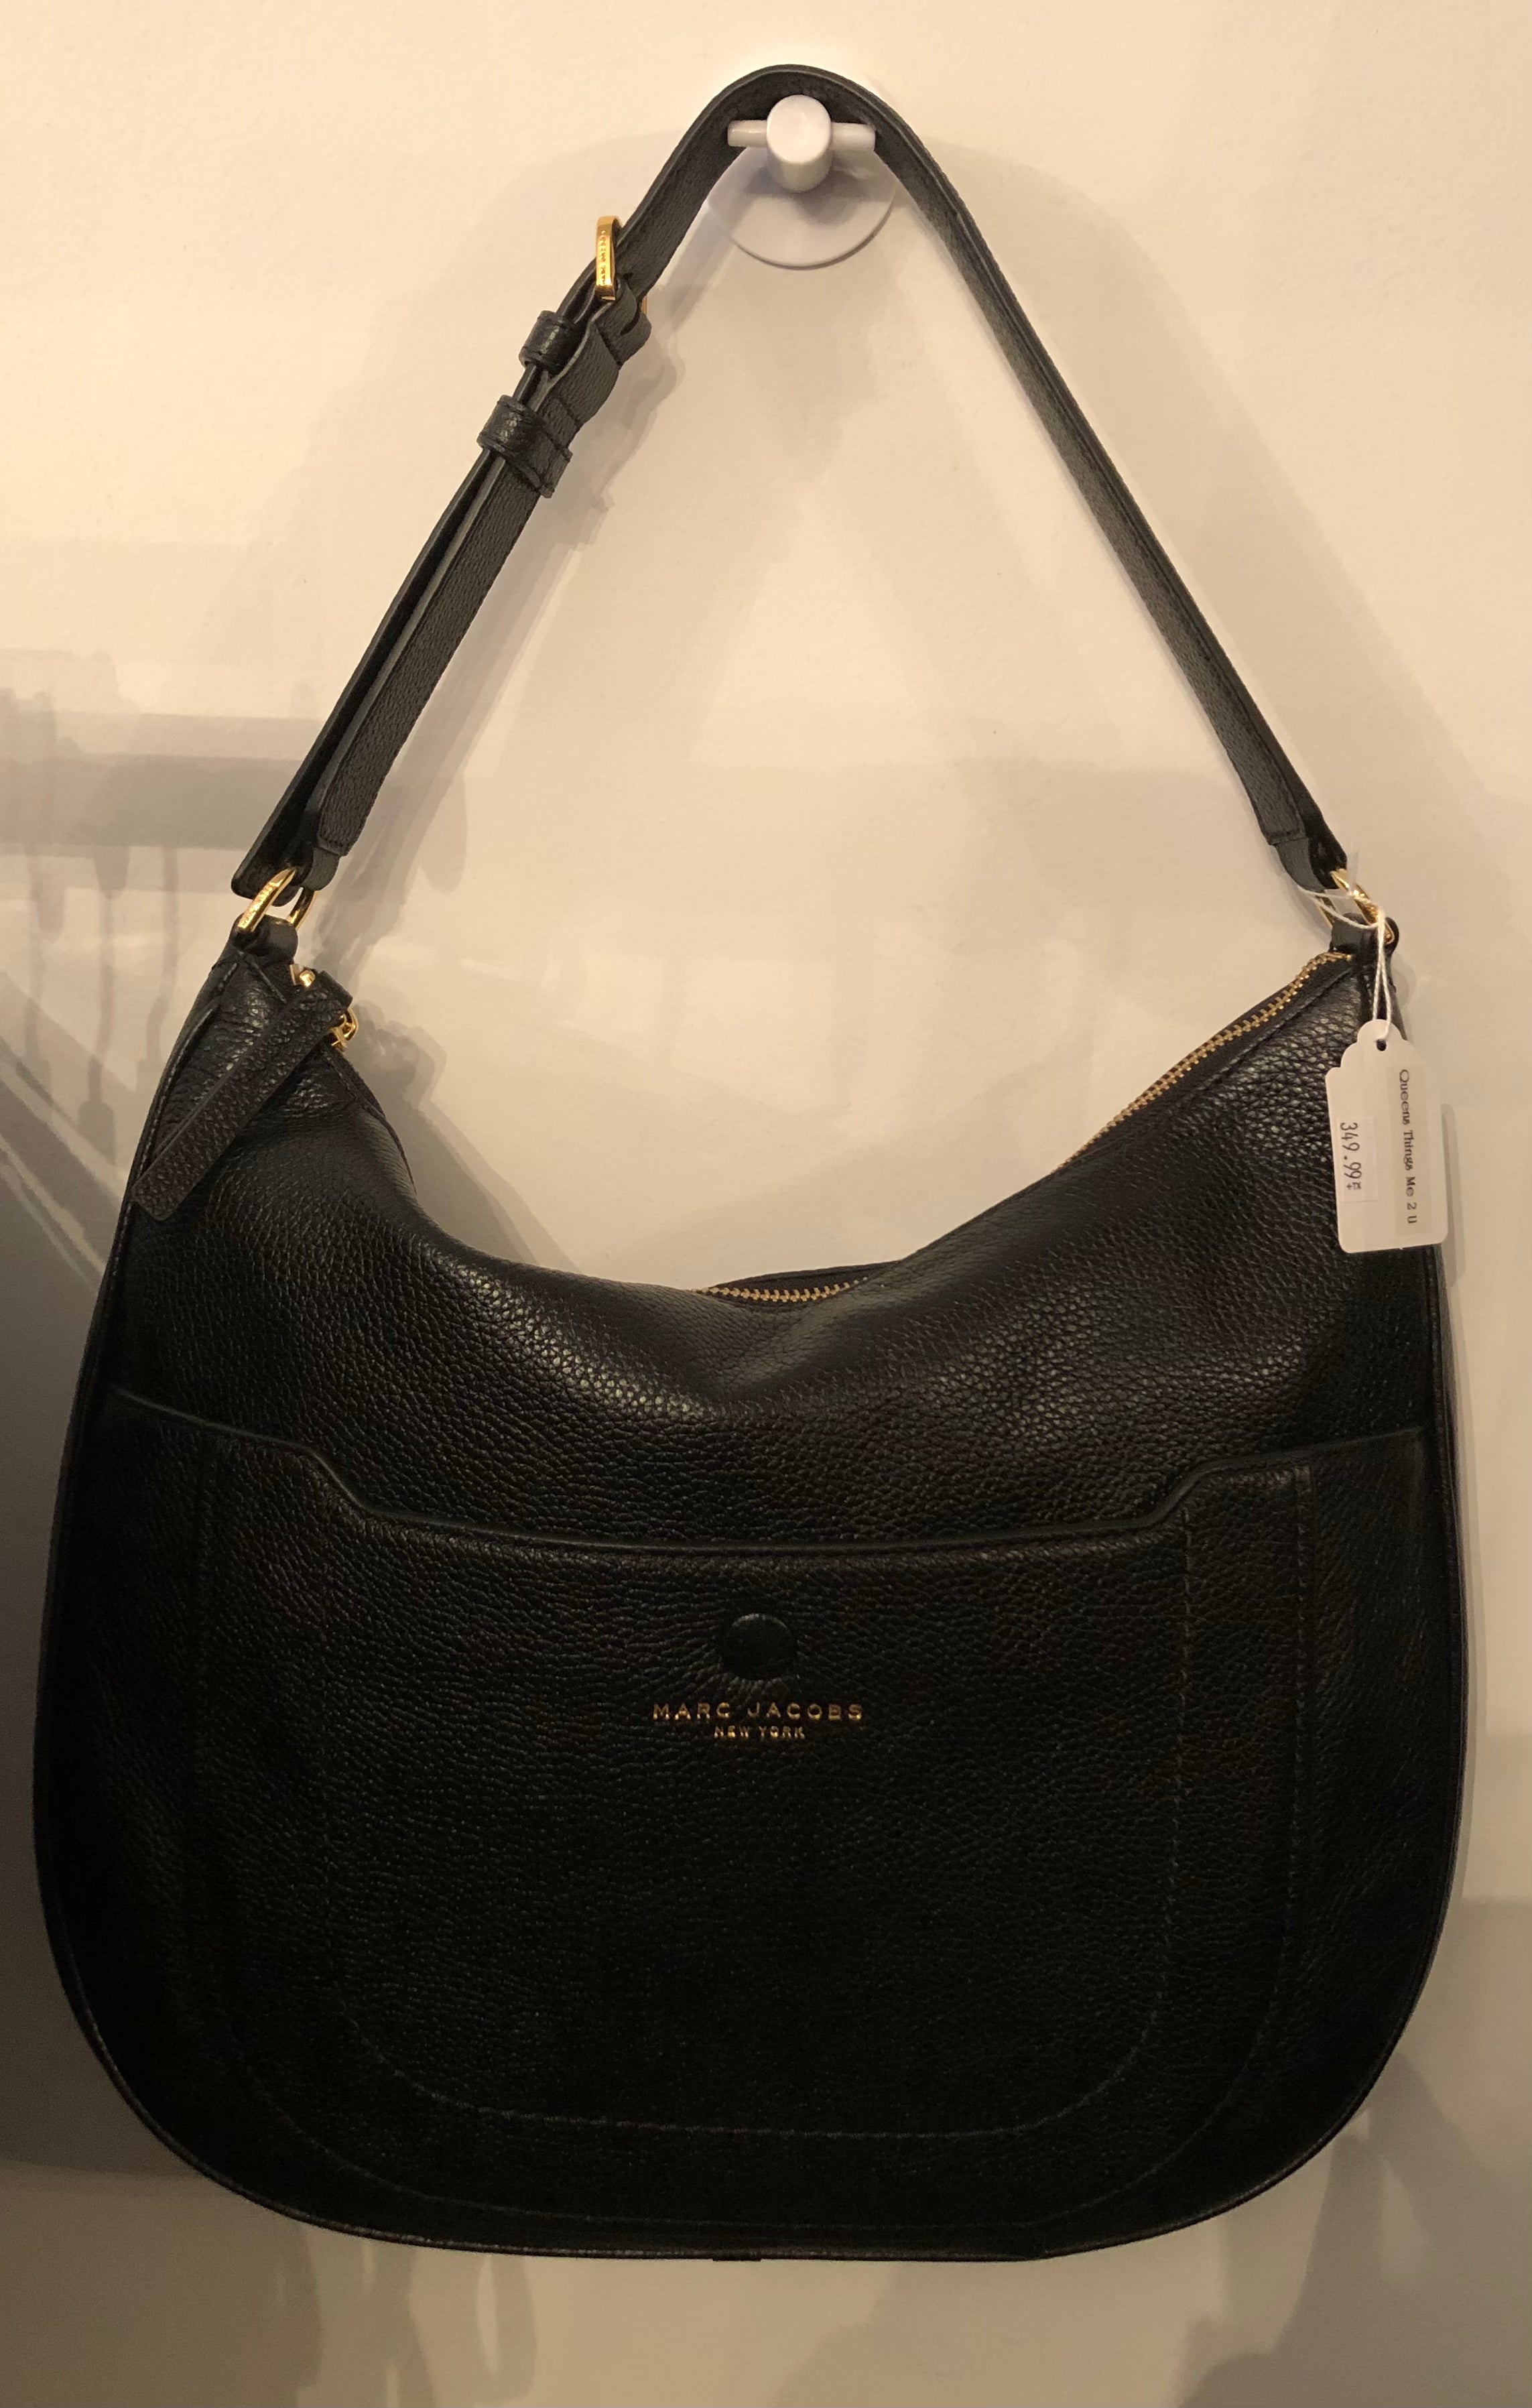 Marc Jacobs: Black Bags now up to −30%